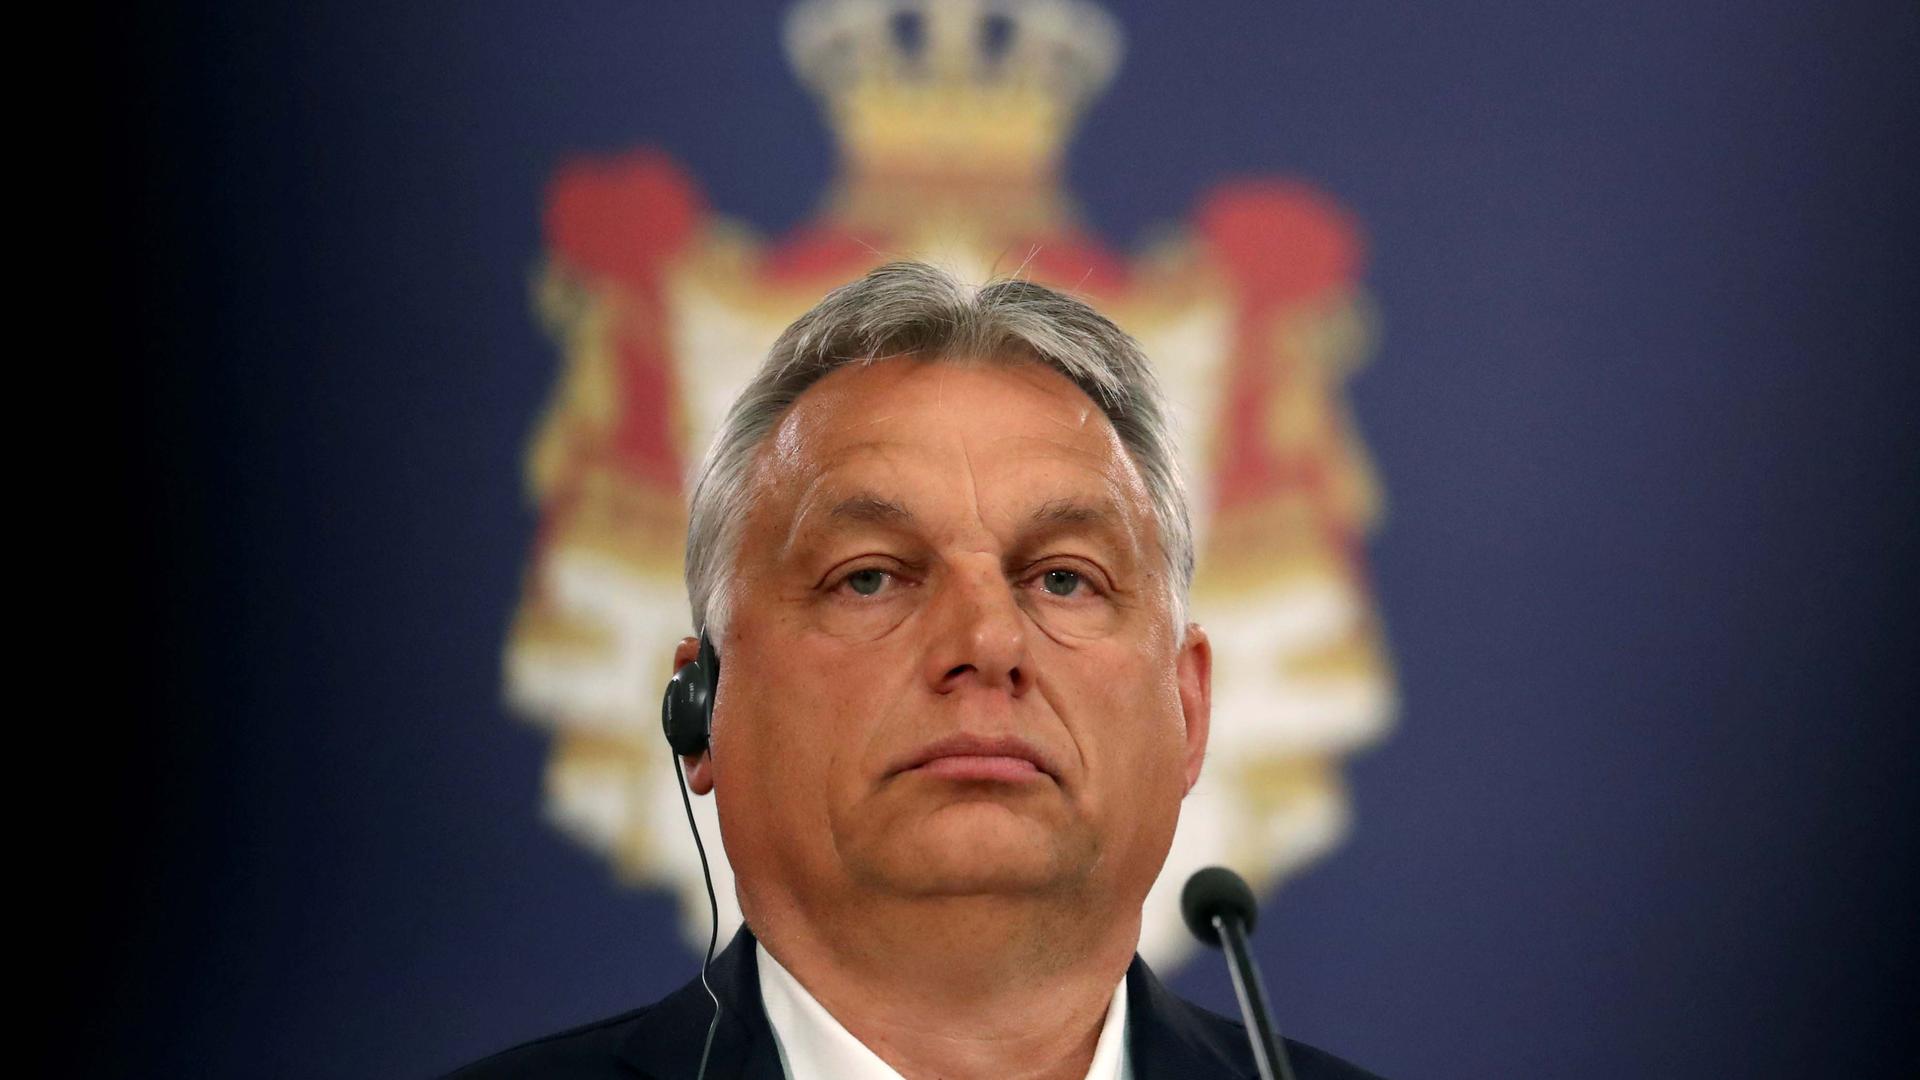 A close-up photo of Hungarian Prime Minister Viktor Orban wearing headphones